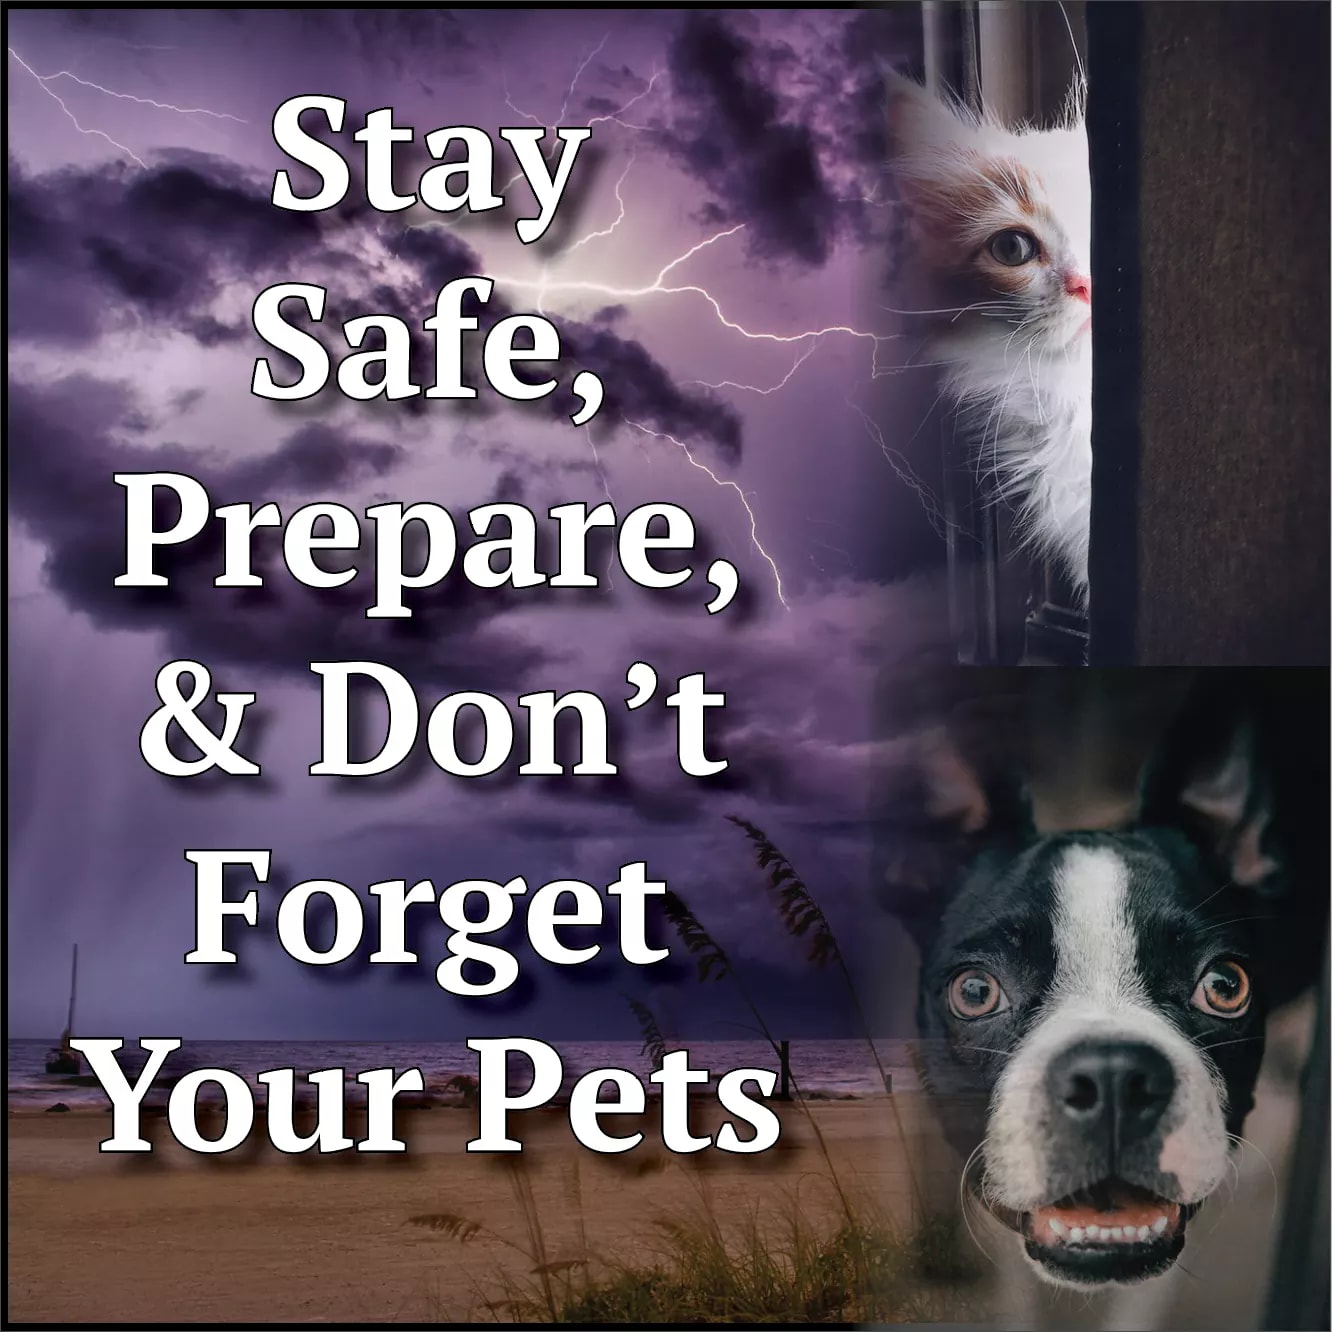 shelter animals quotes